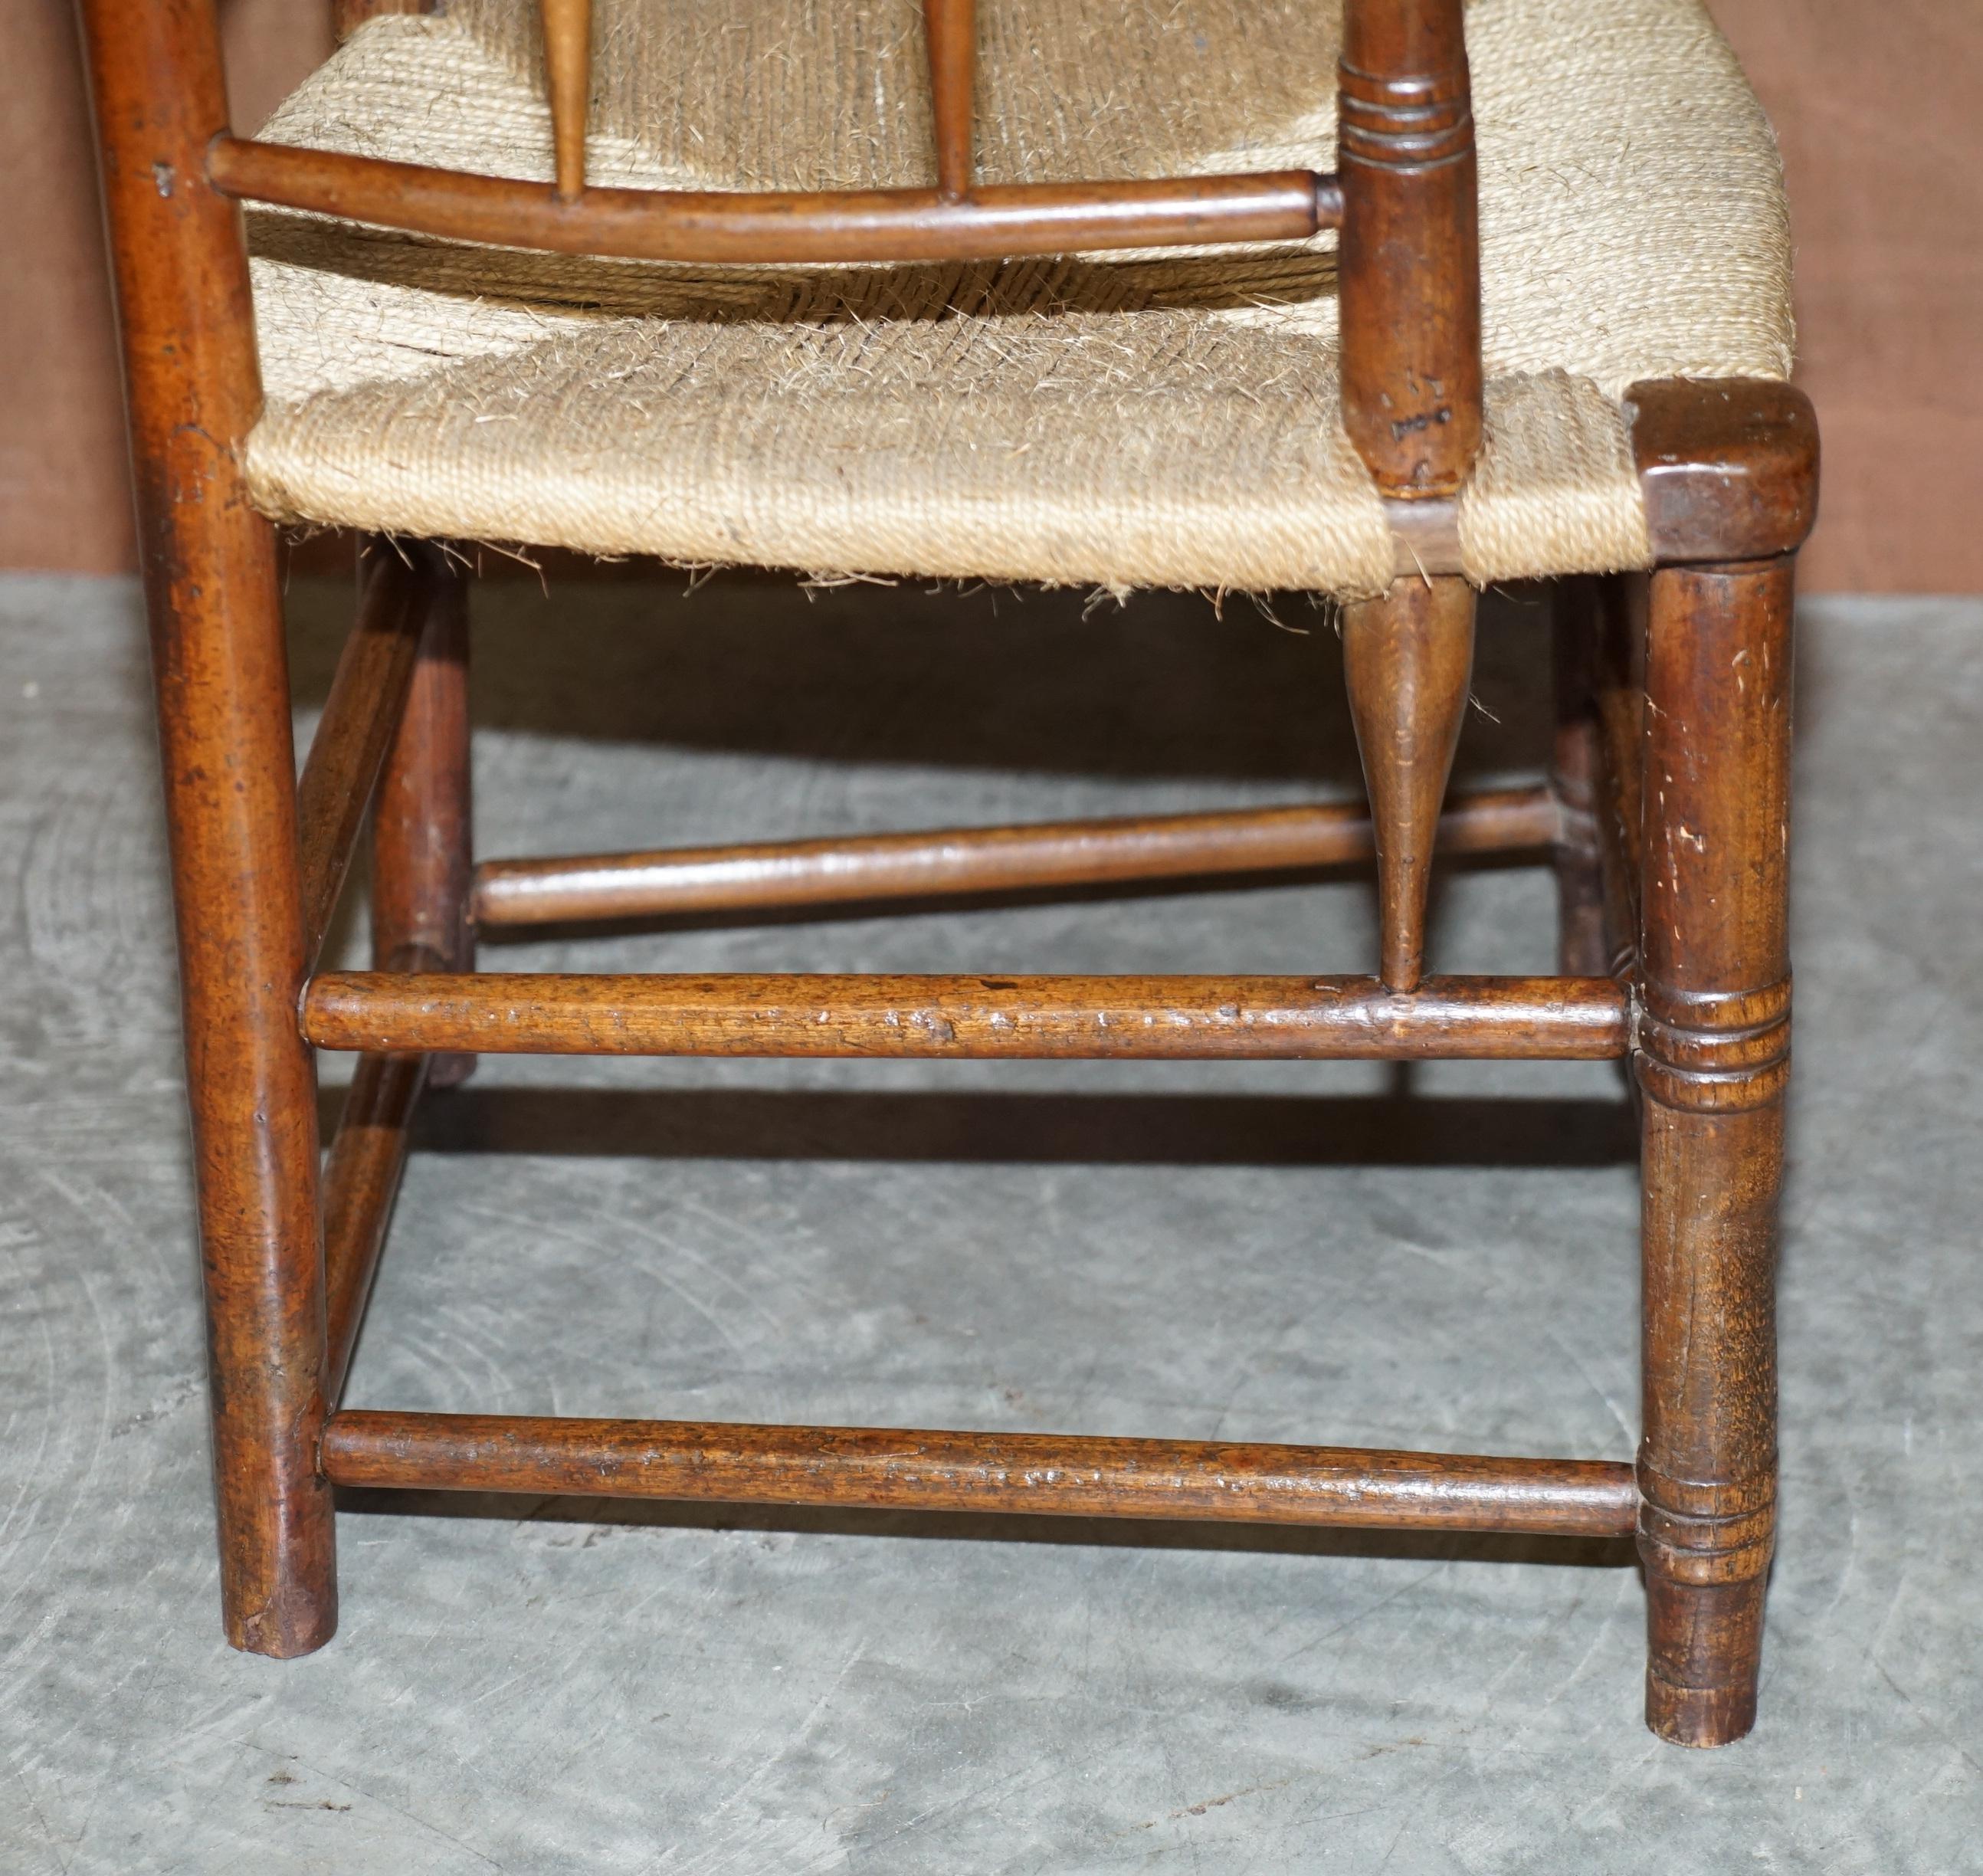 Antique Original William Morris Sussex Rope Seat Armchair Seen in the V&A Museum For Sale 7